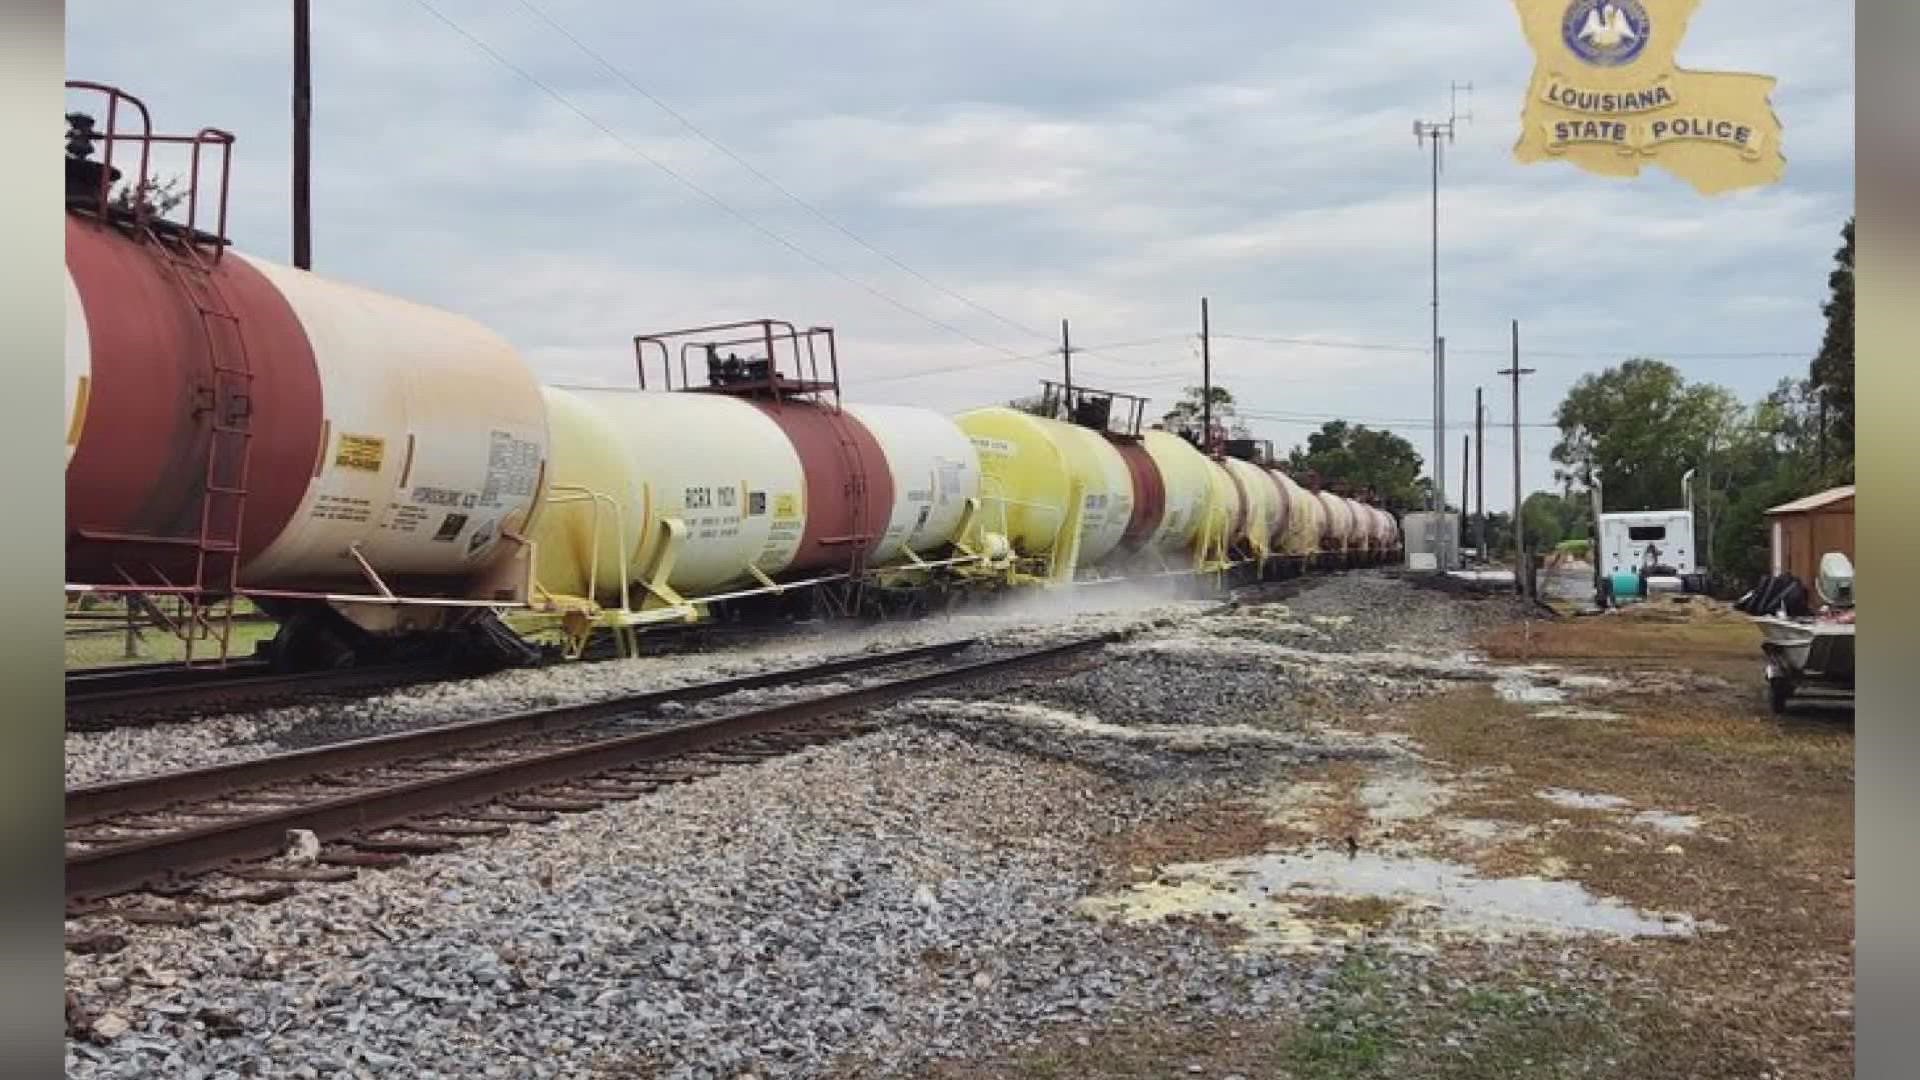 A train derailment caused a chemical spill in St. James Parish, forcing evacuations in the Pauline area